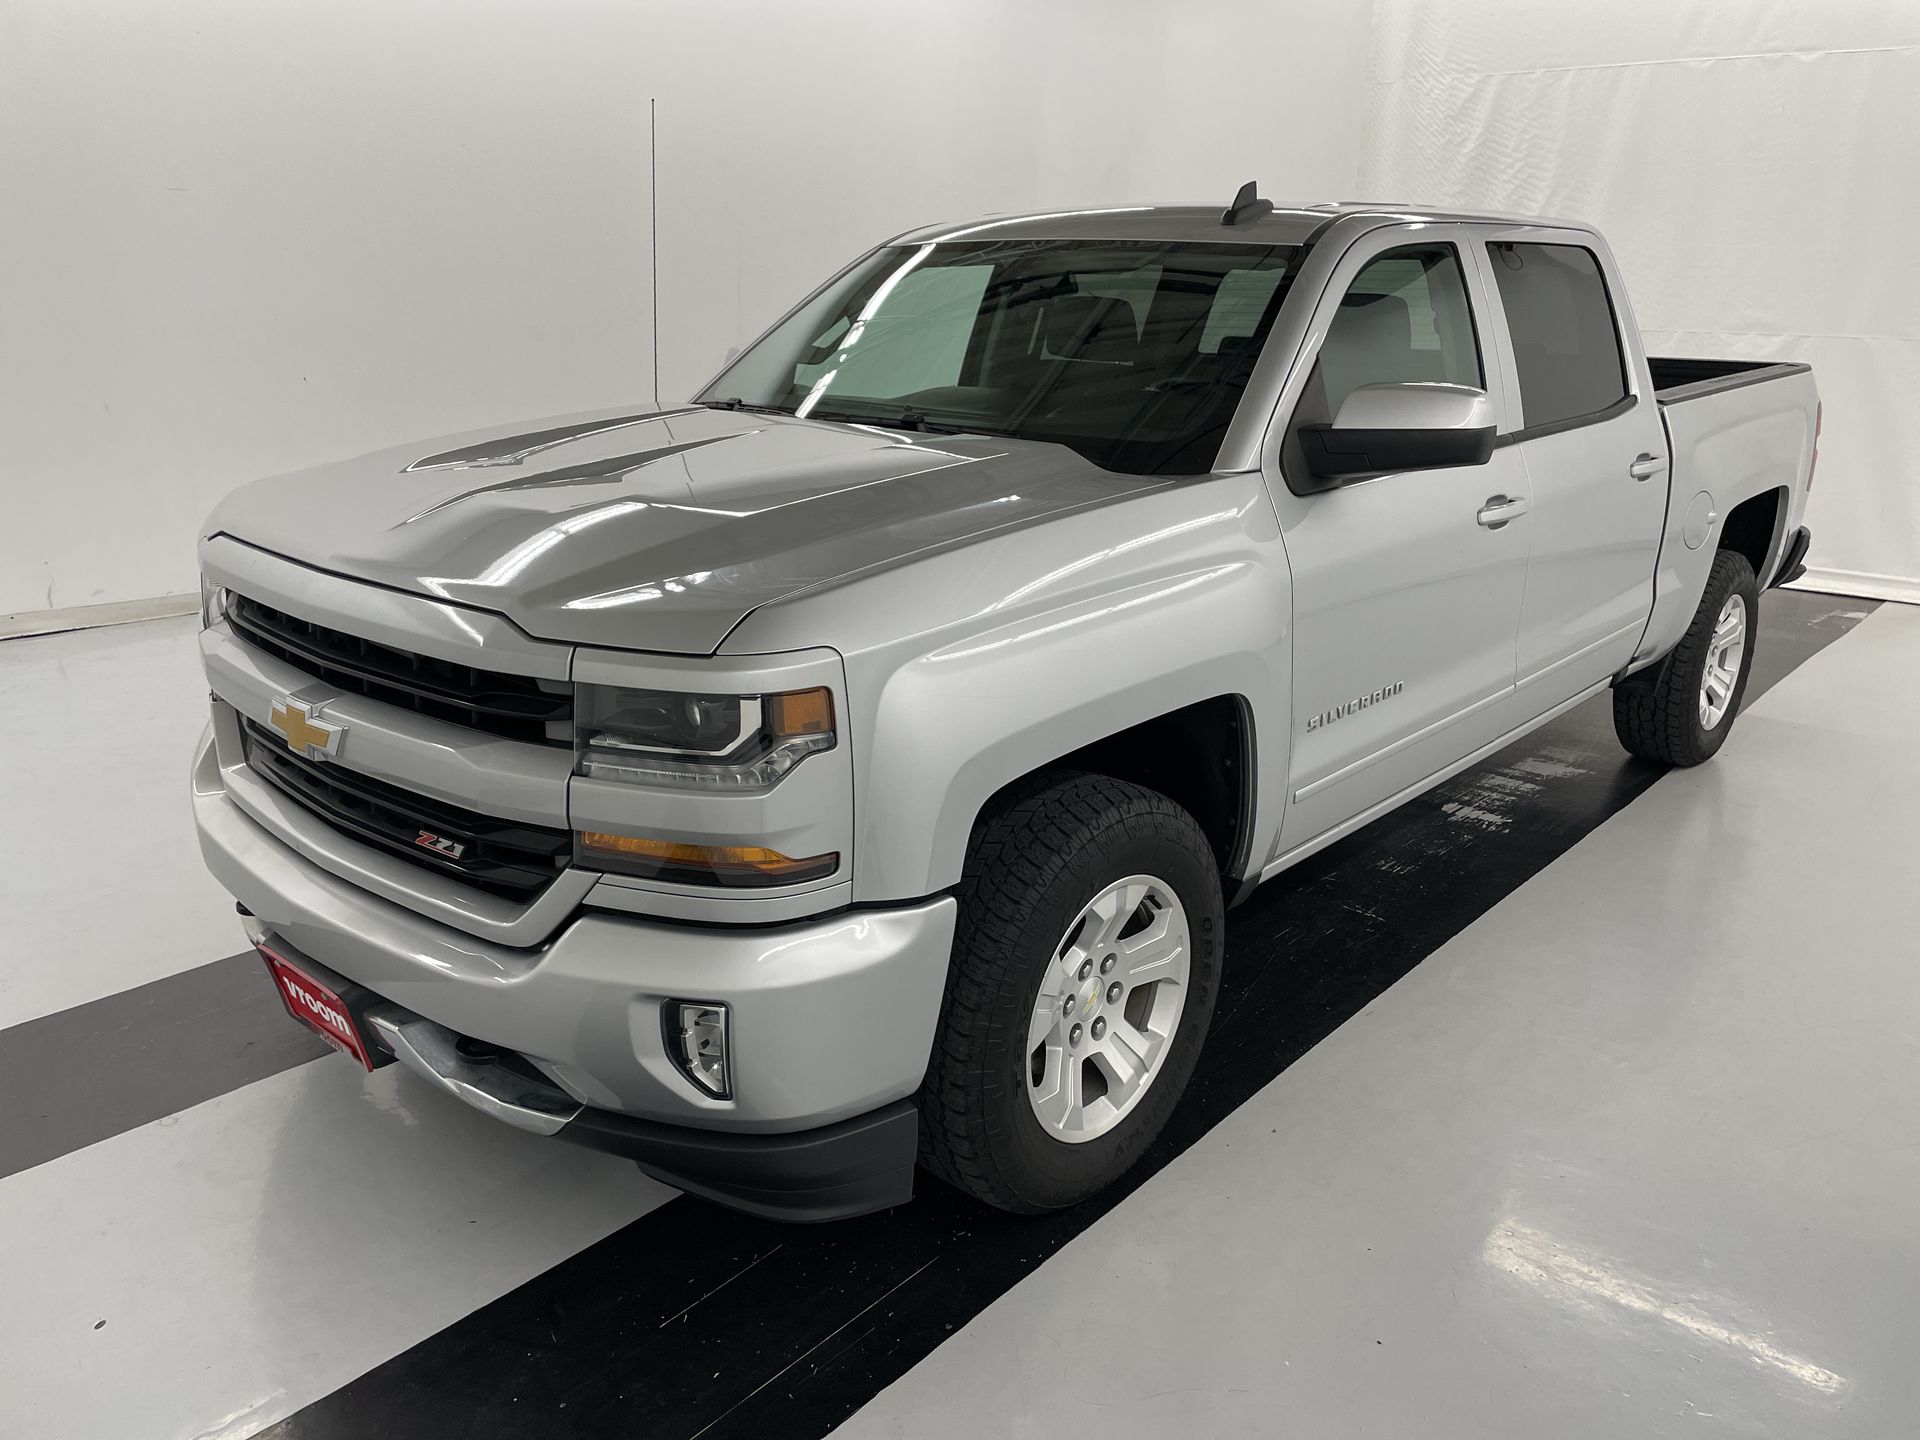 Chevrolet Silverado Pick-Up Weiss 4 Generation Ab 2018 1/24 Welly Modell Auto m 